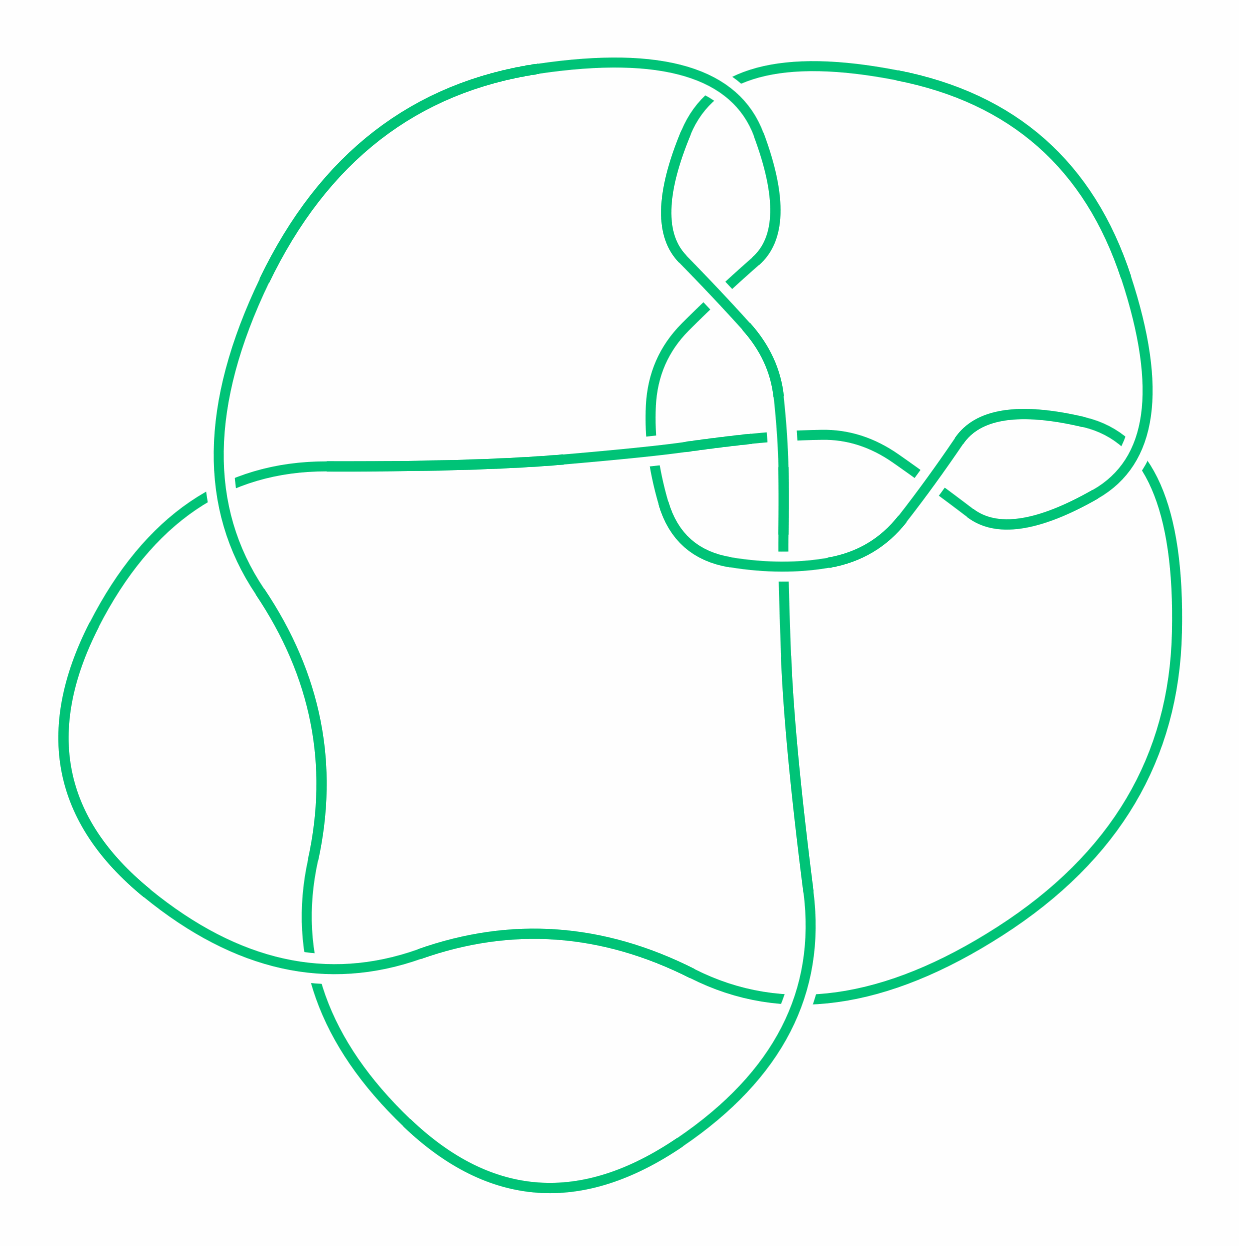 A knot diagram representing the first of the “Perko Pair” of knots